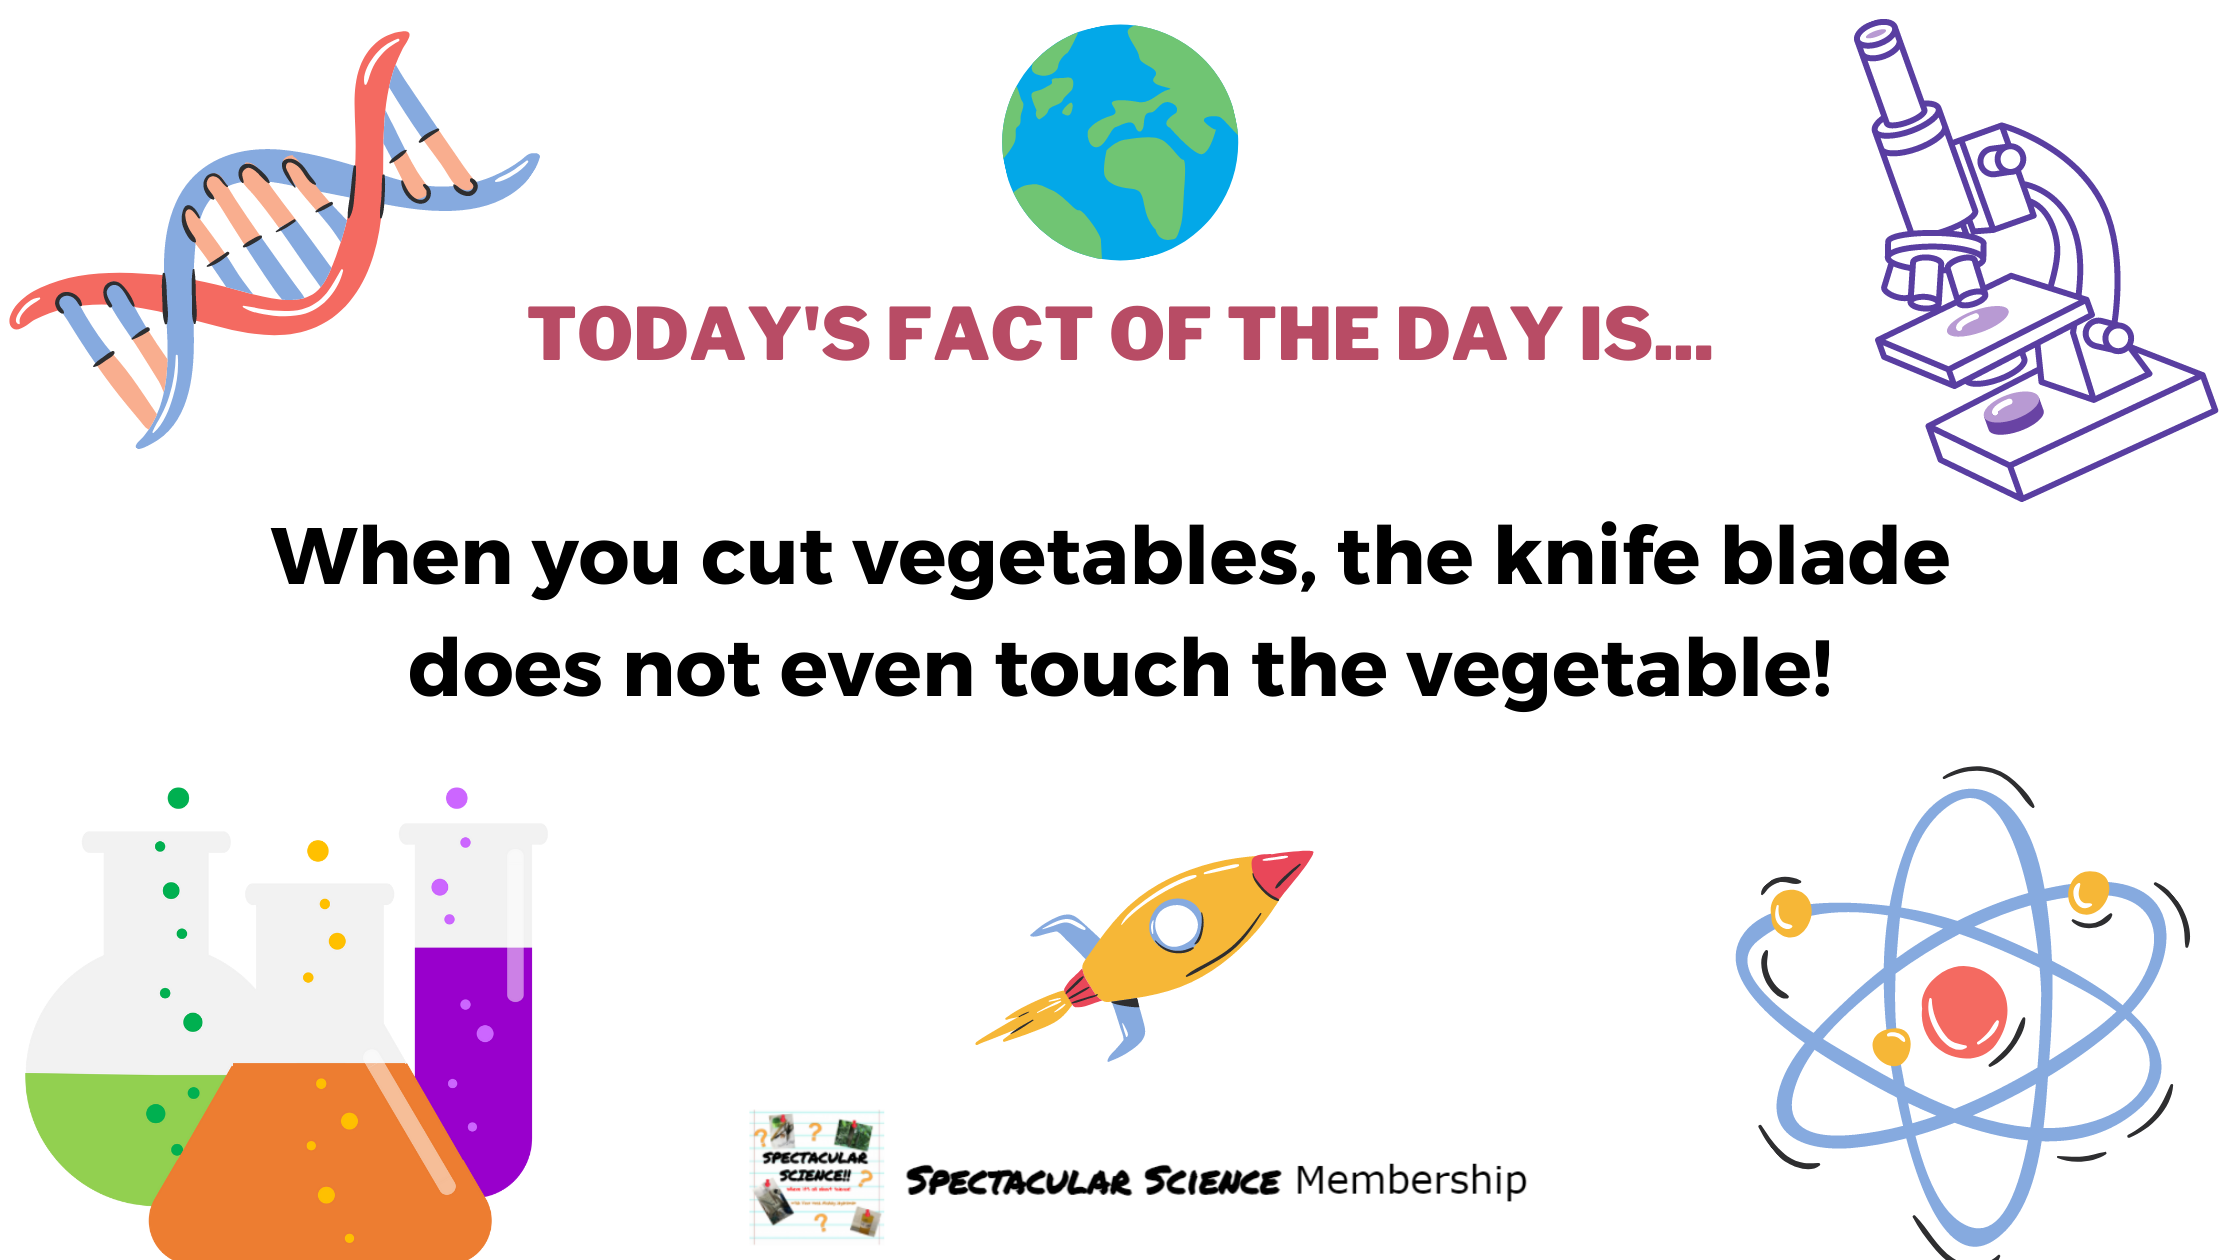 Fact of the Day Image Feb. 11th